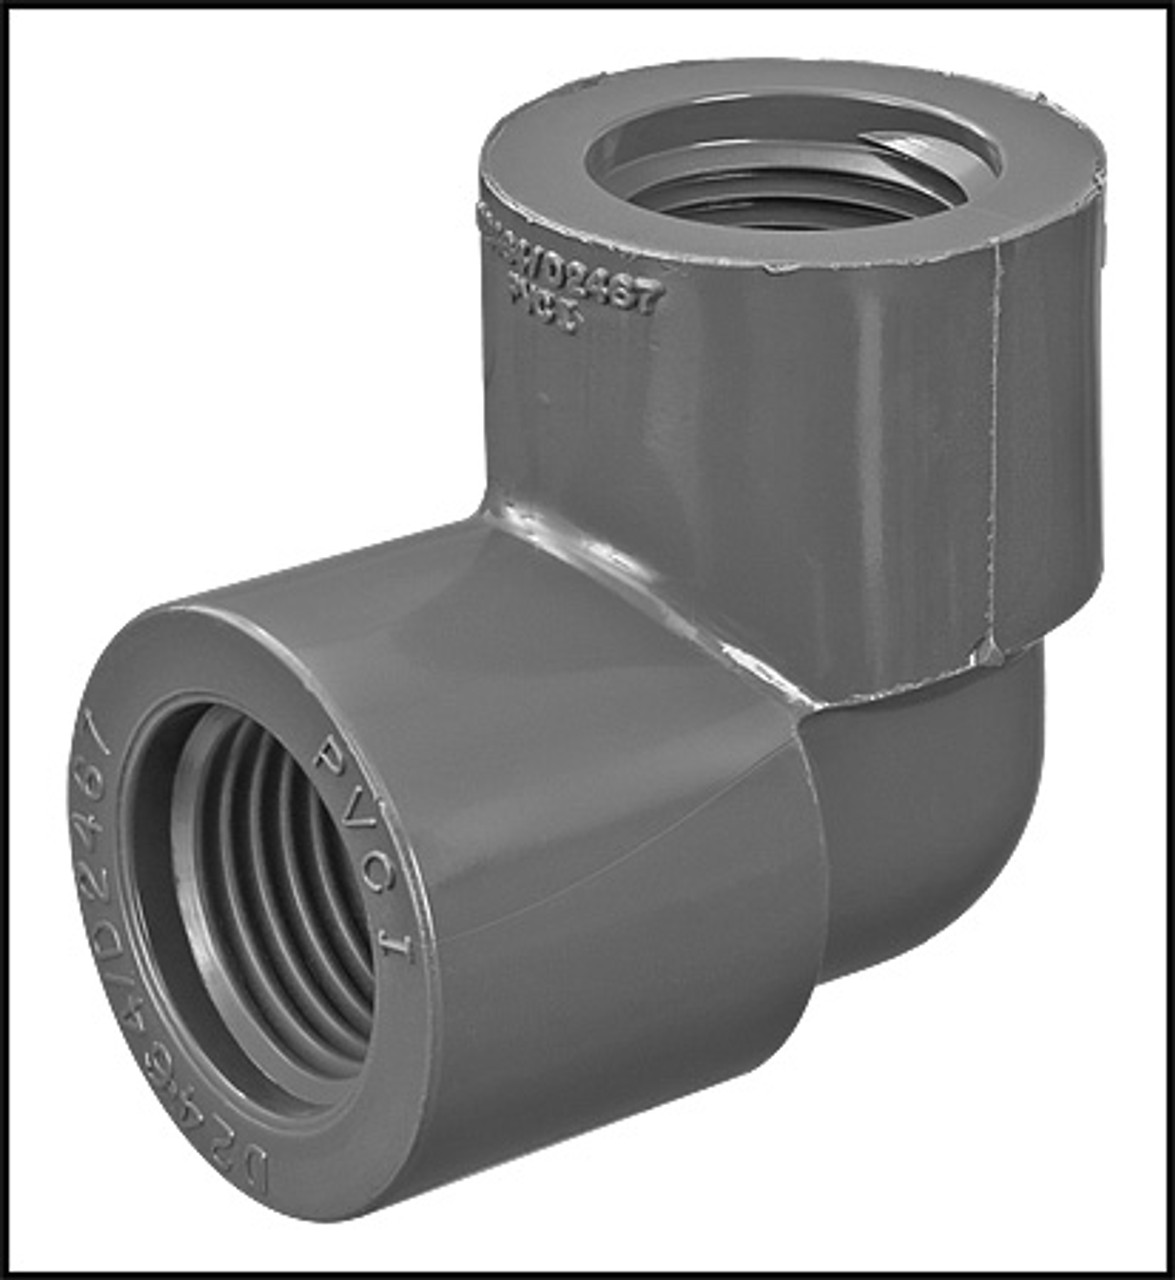 Lasco 1/2" 90 Degree PVC Pipe Fitting SCH 80 FPT X FPT (#808-005)